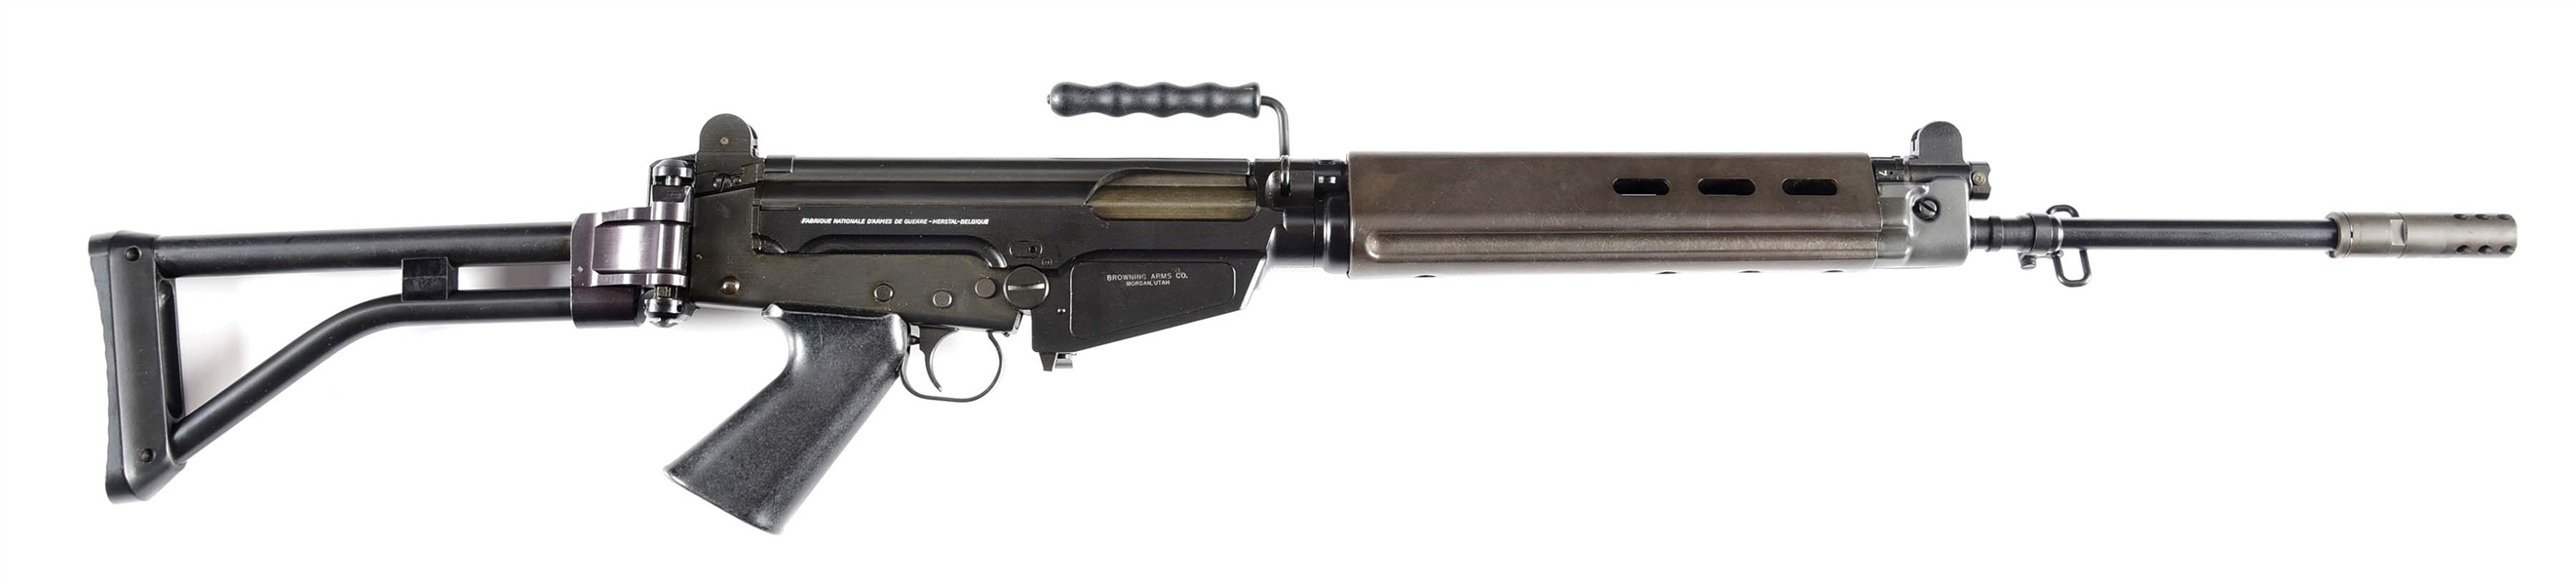 (C) FABRIQUE NATIONALE G SERIES TYPE II FAL SEMI-AUTOMATIC RIFLE.